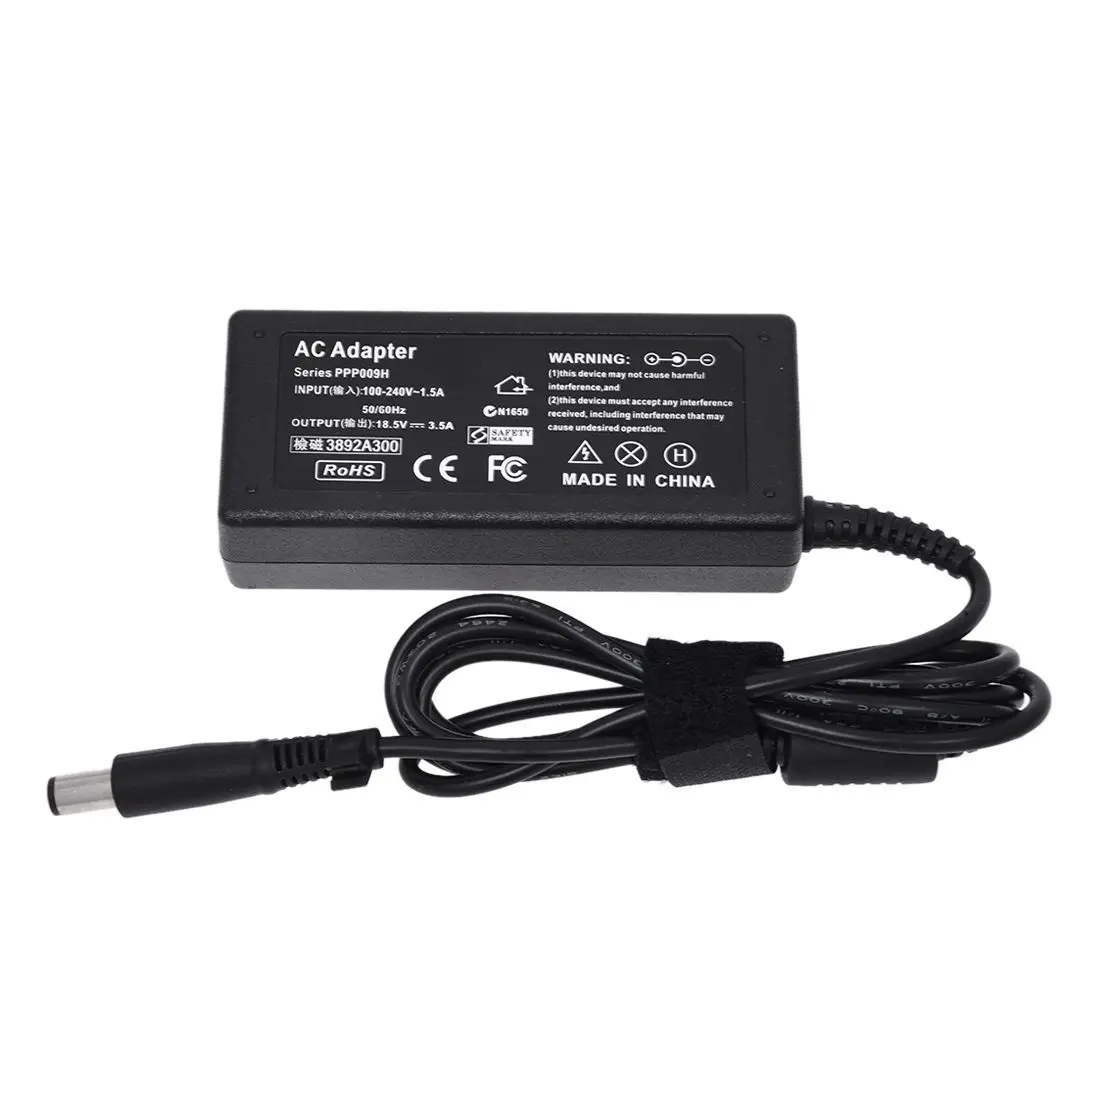 

New AC Adapter Charger For HP Pavilion G4 G5 G6 G7 Series Laptop Power Supply